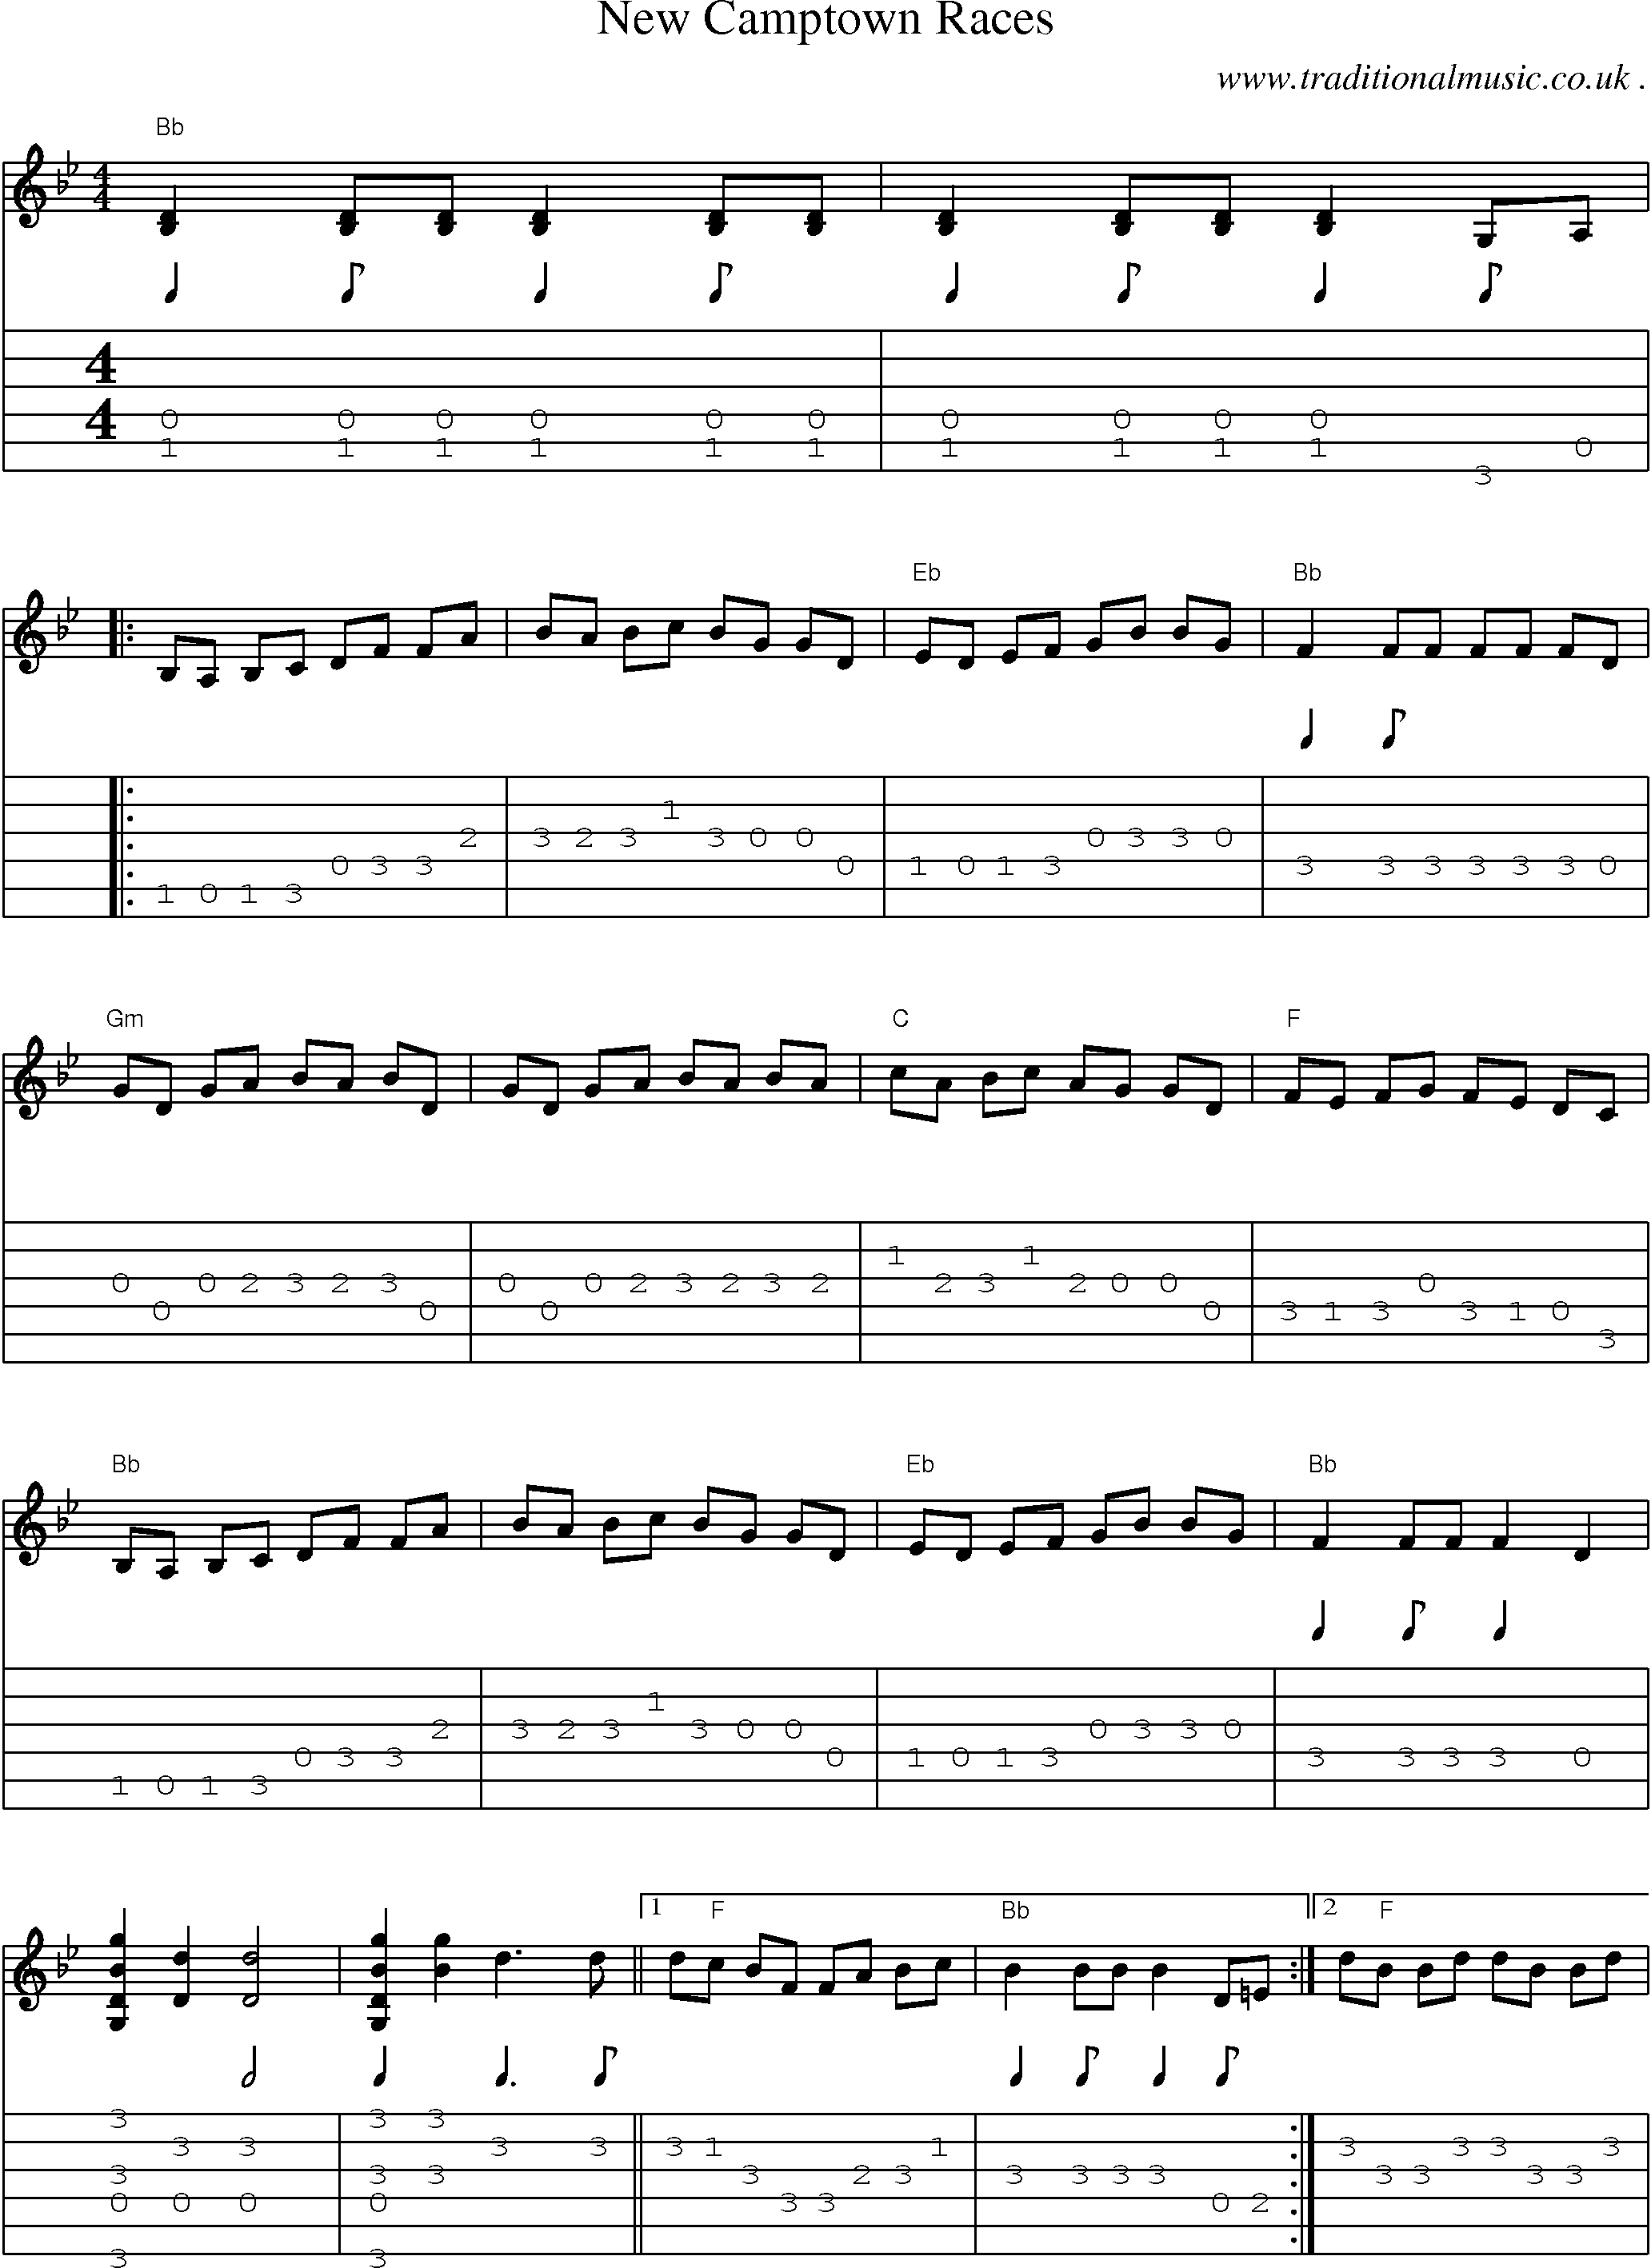 Music Score and Guitar Tabs for New Camptown Races